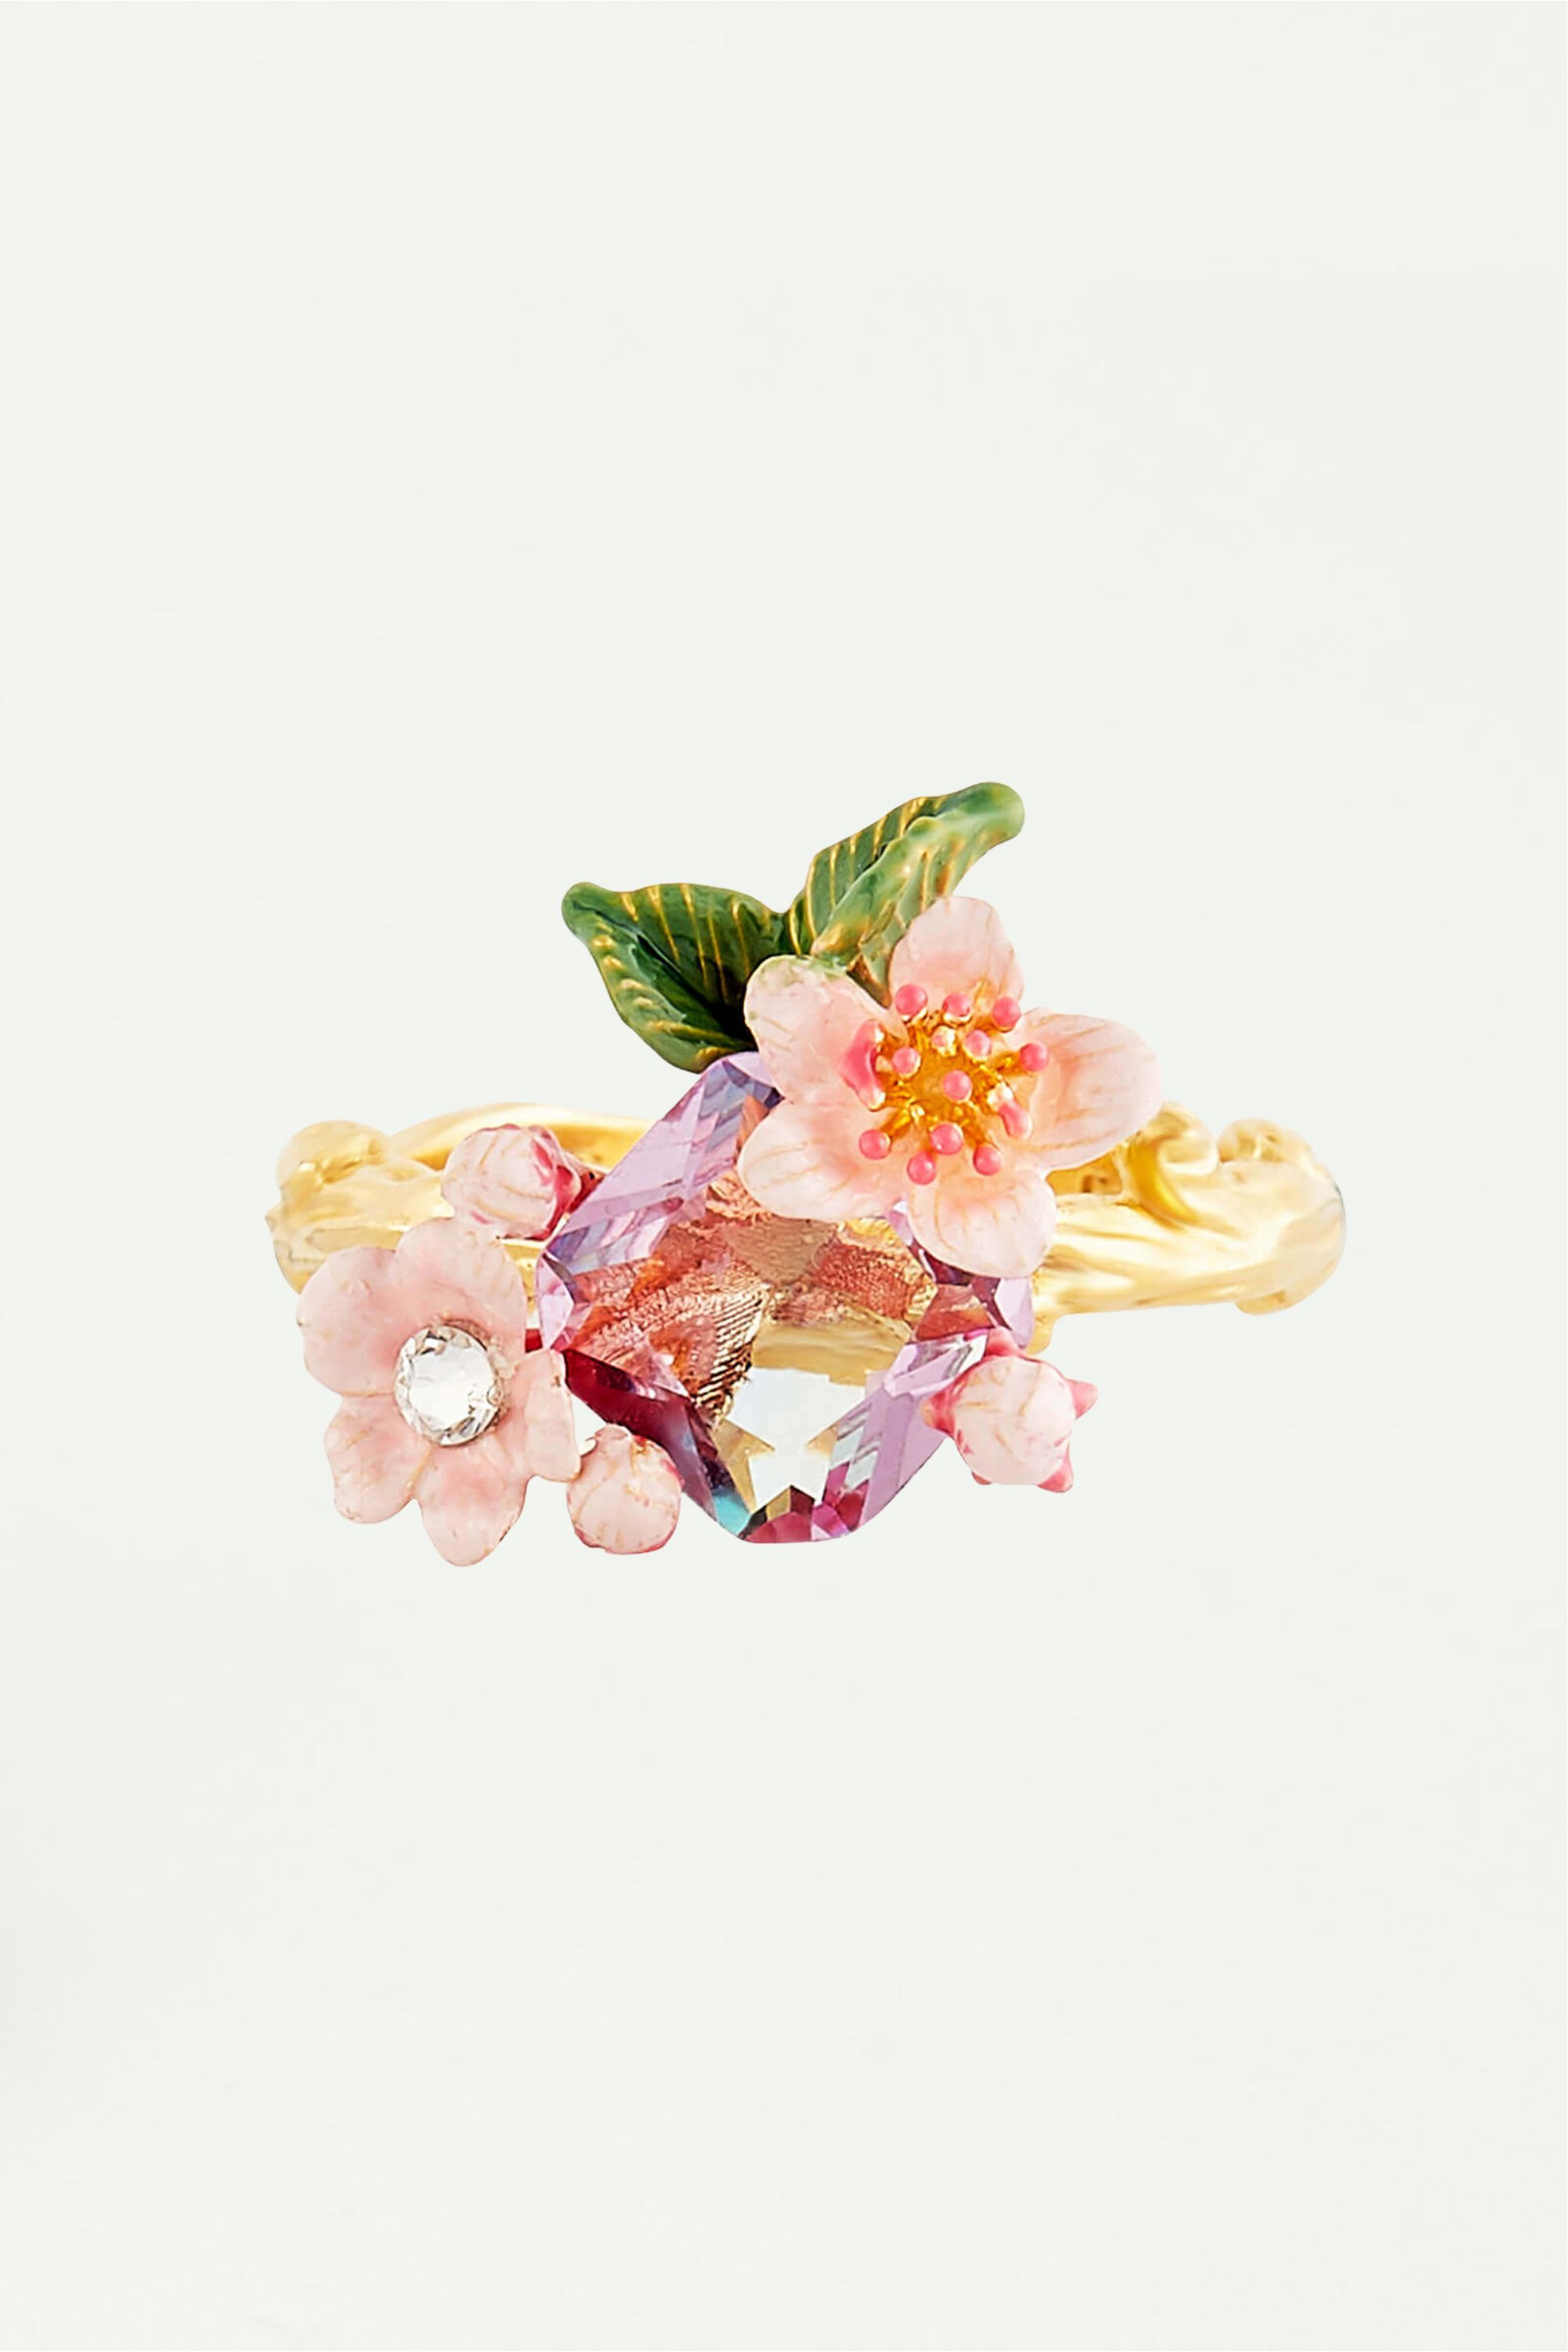 Japanese Emperor butterfly and cherry blossom ring